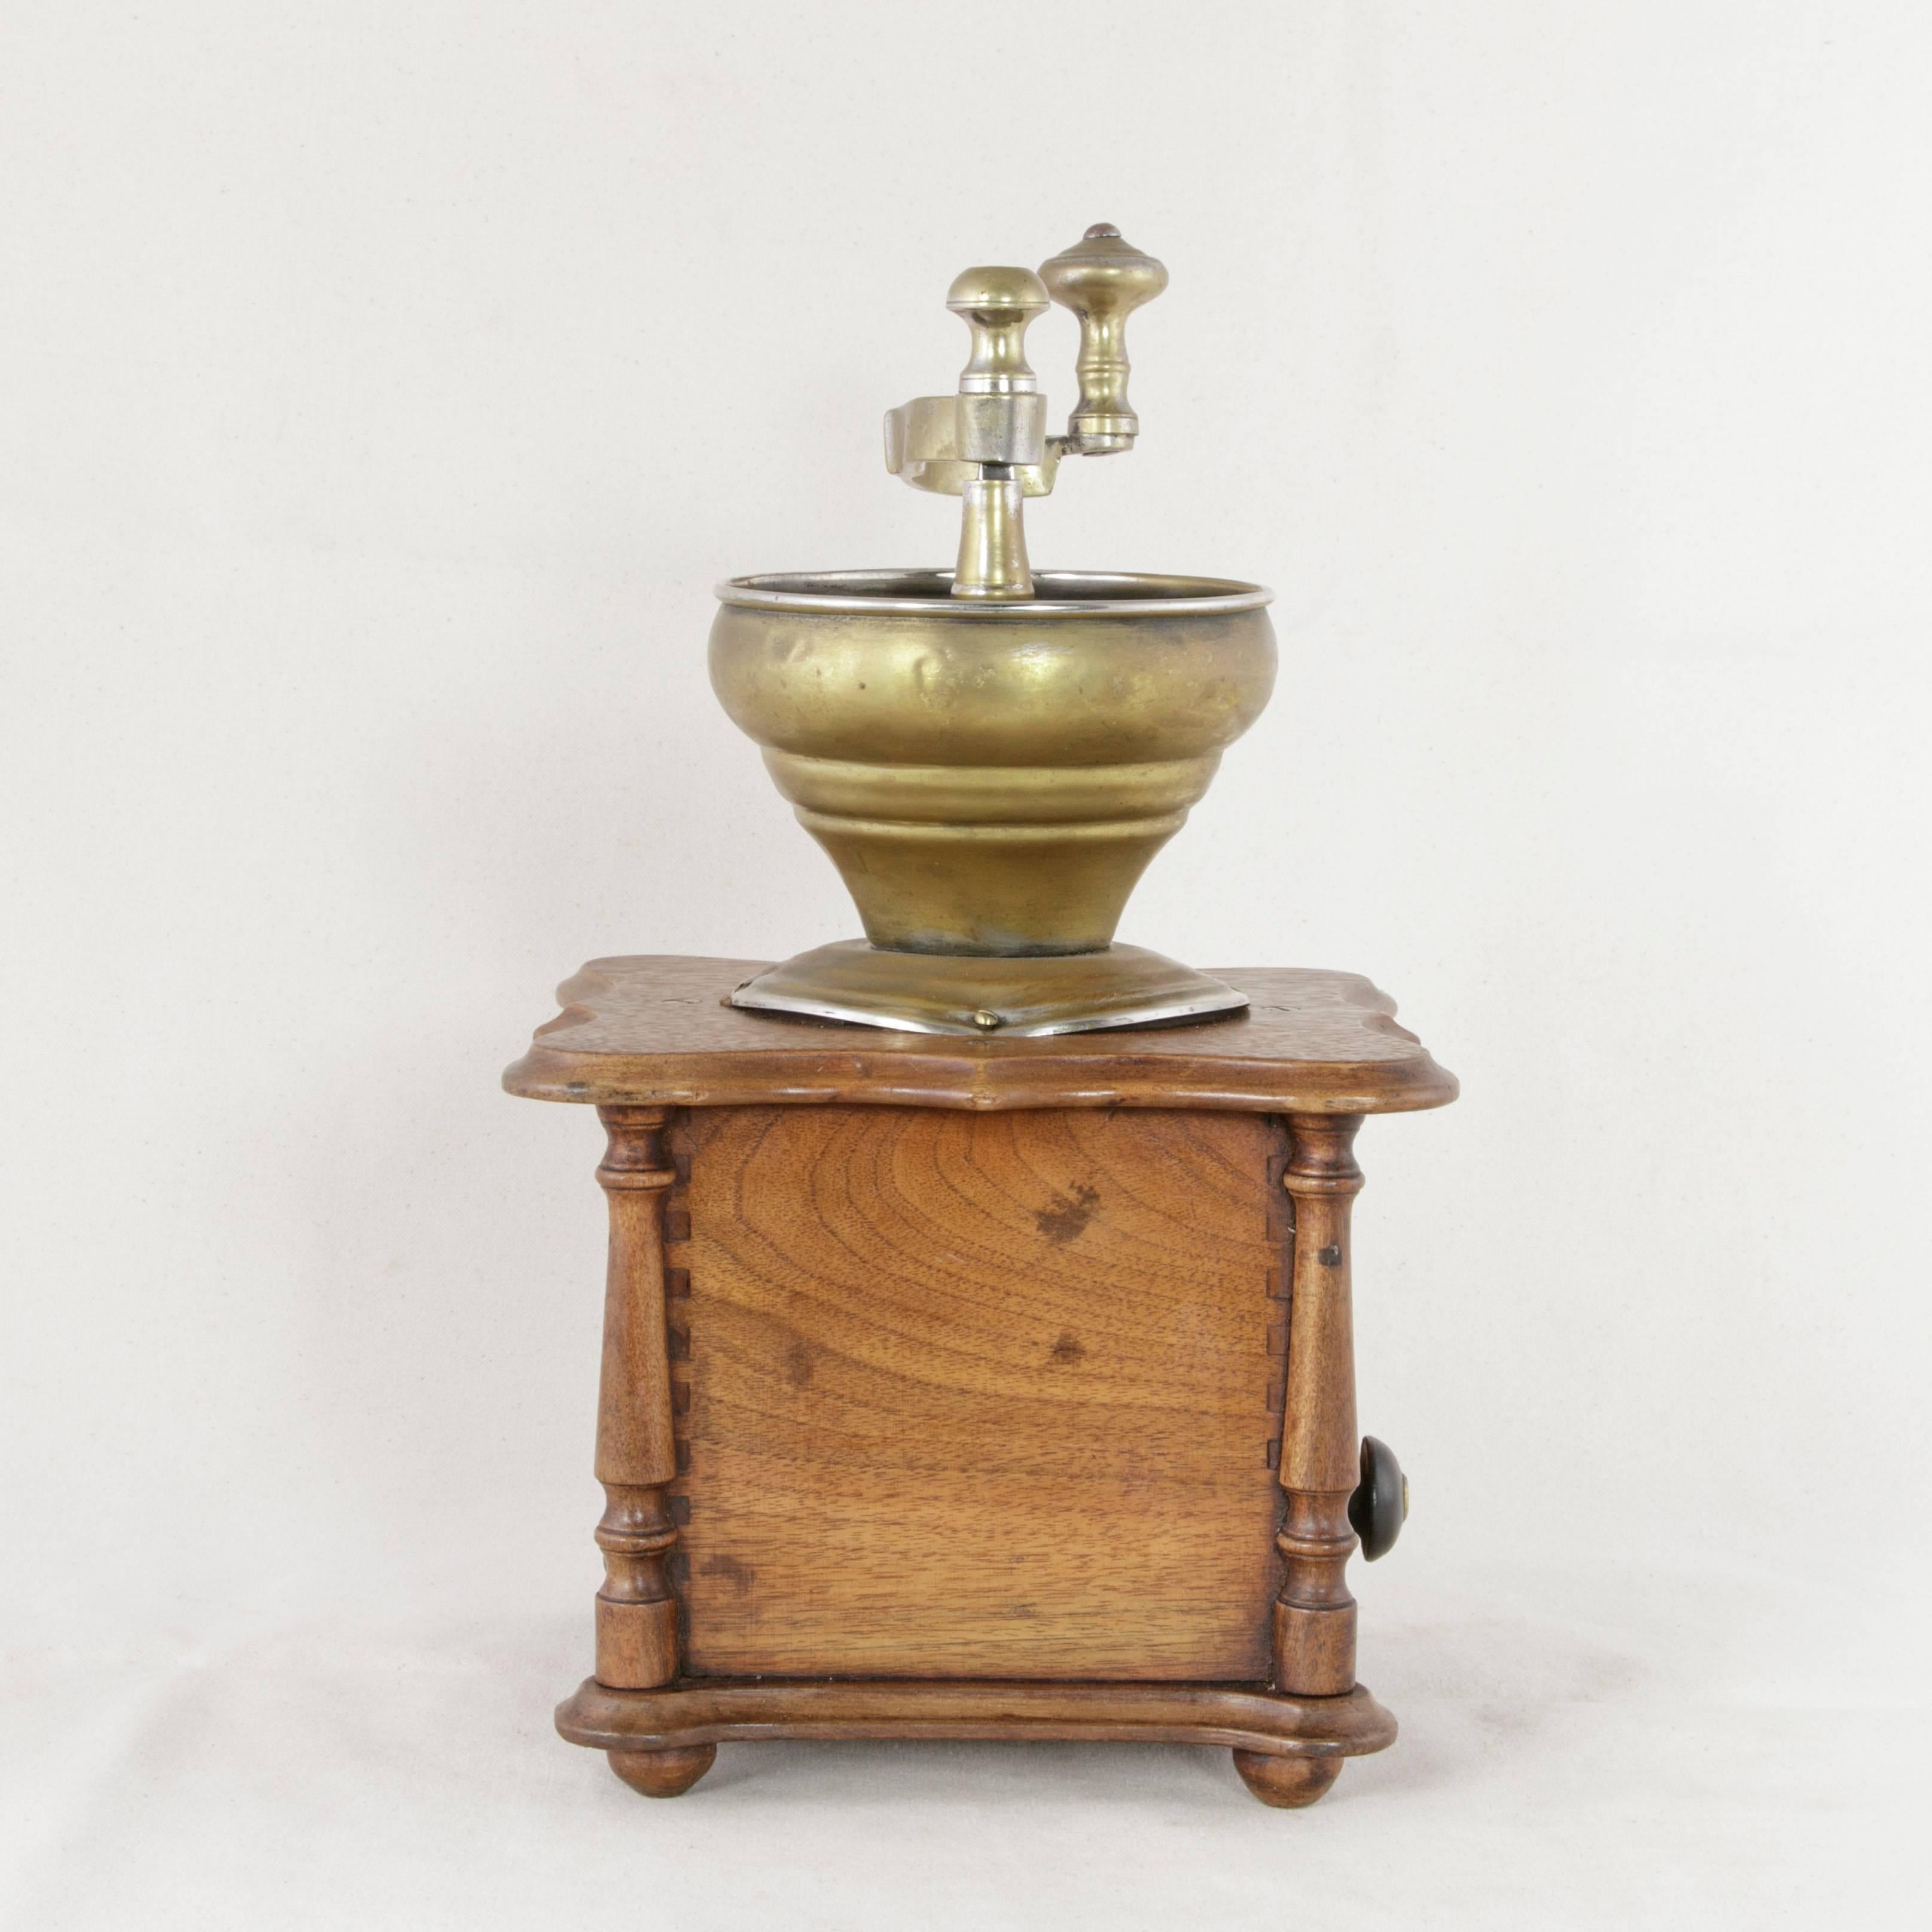 Ebonized Late 19th Century French Walnut Coffee Grinder with Brass Funnel and Mechanism